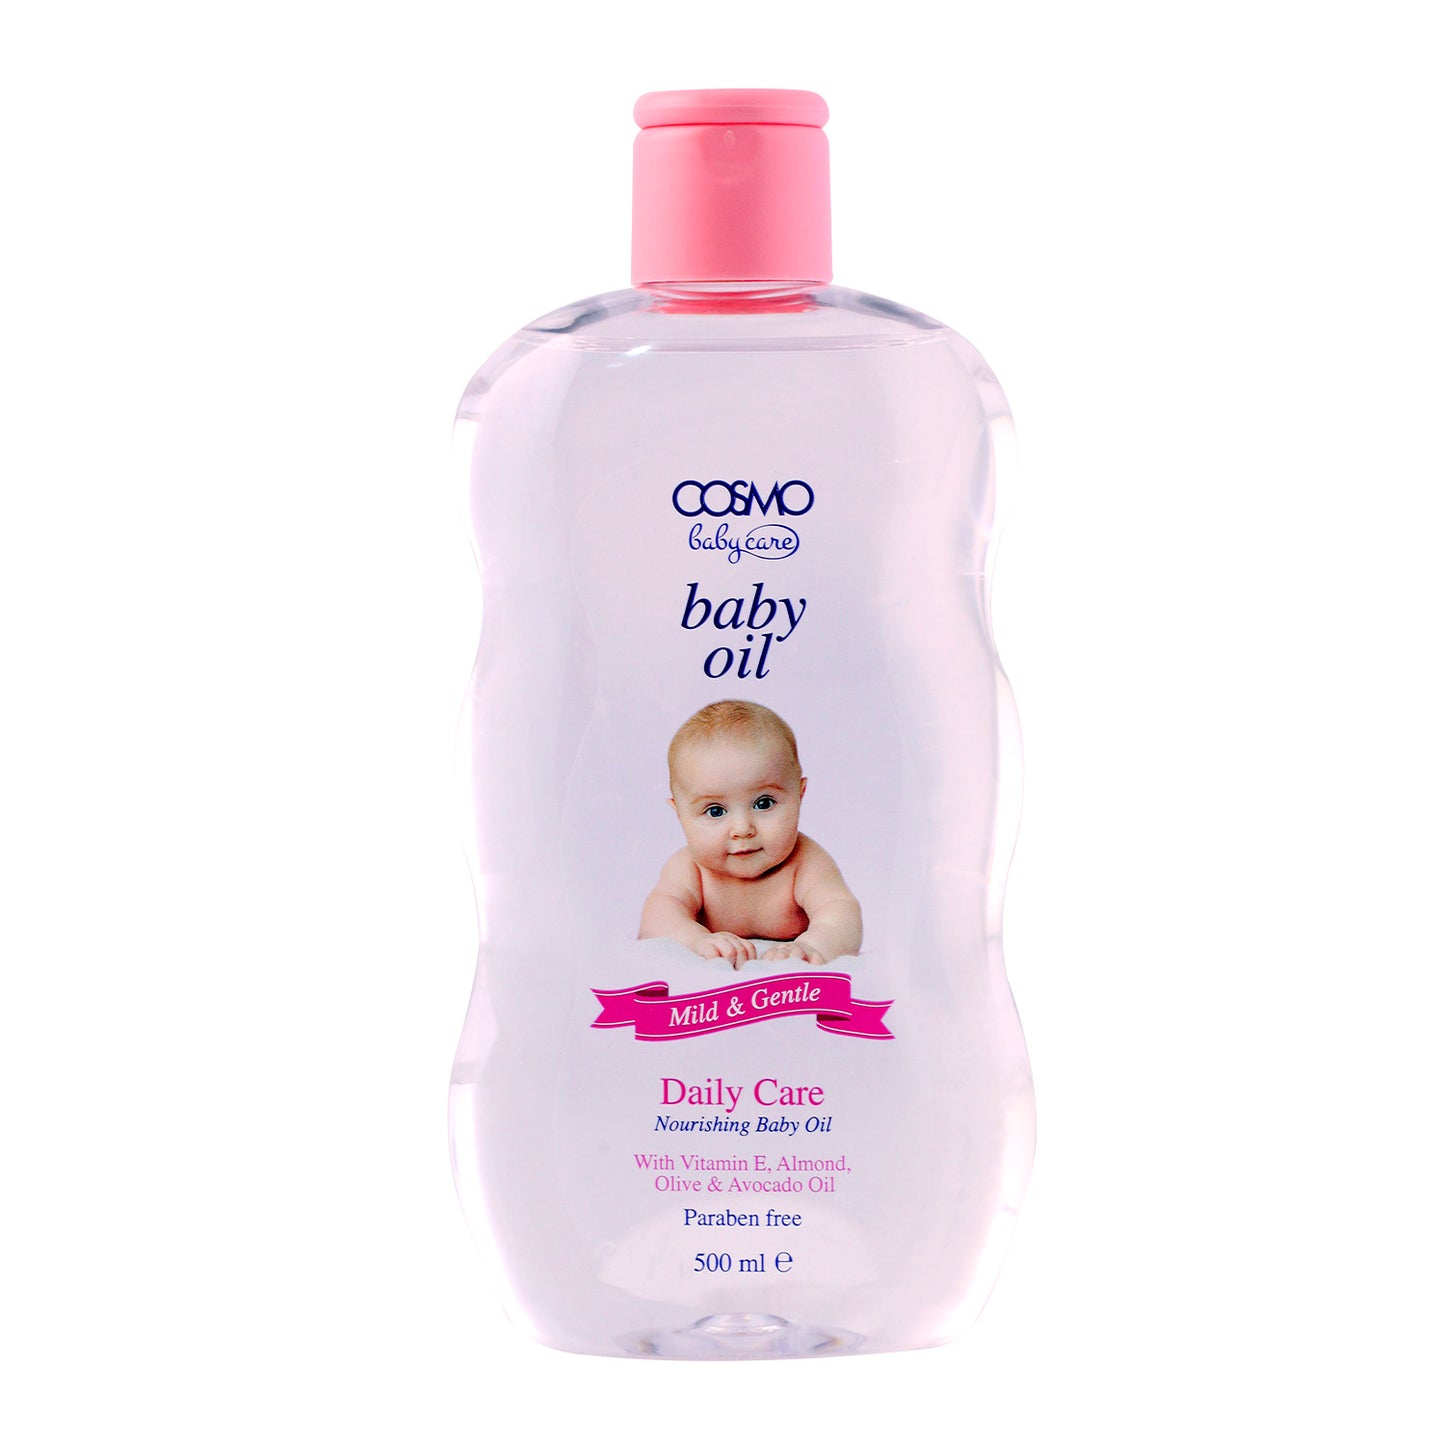 DAILY CARE NOURISHING - BABY OIL